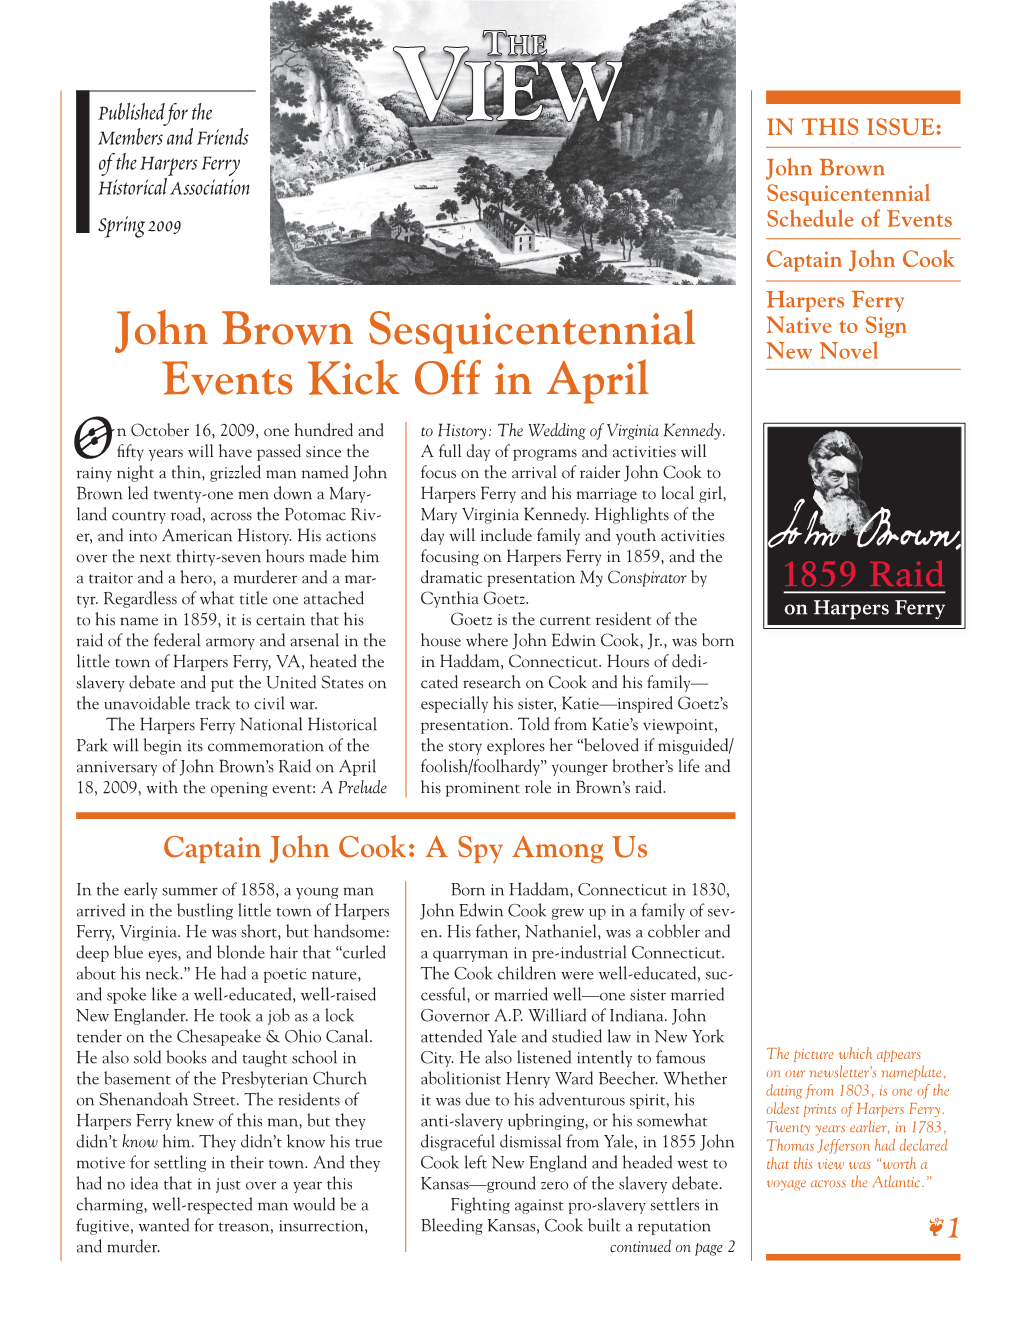 John Brown Sesquicentennial Events Kick Off in April